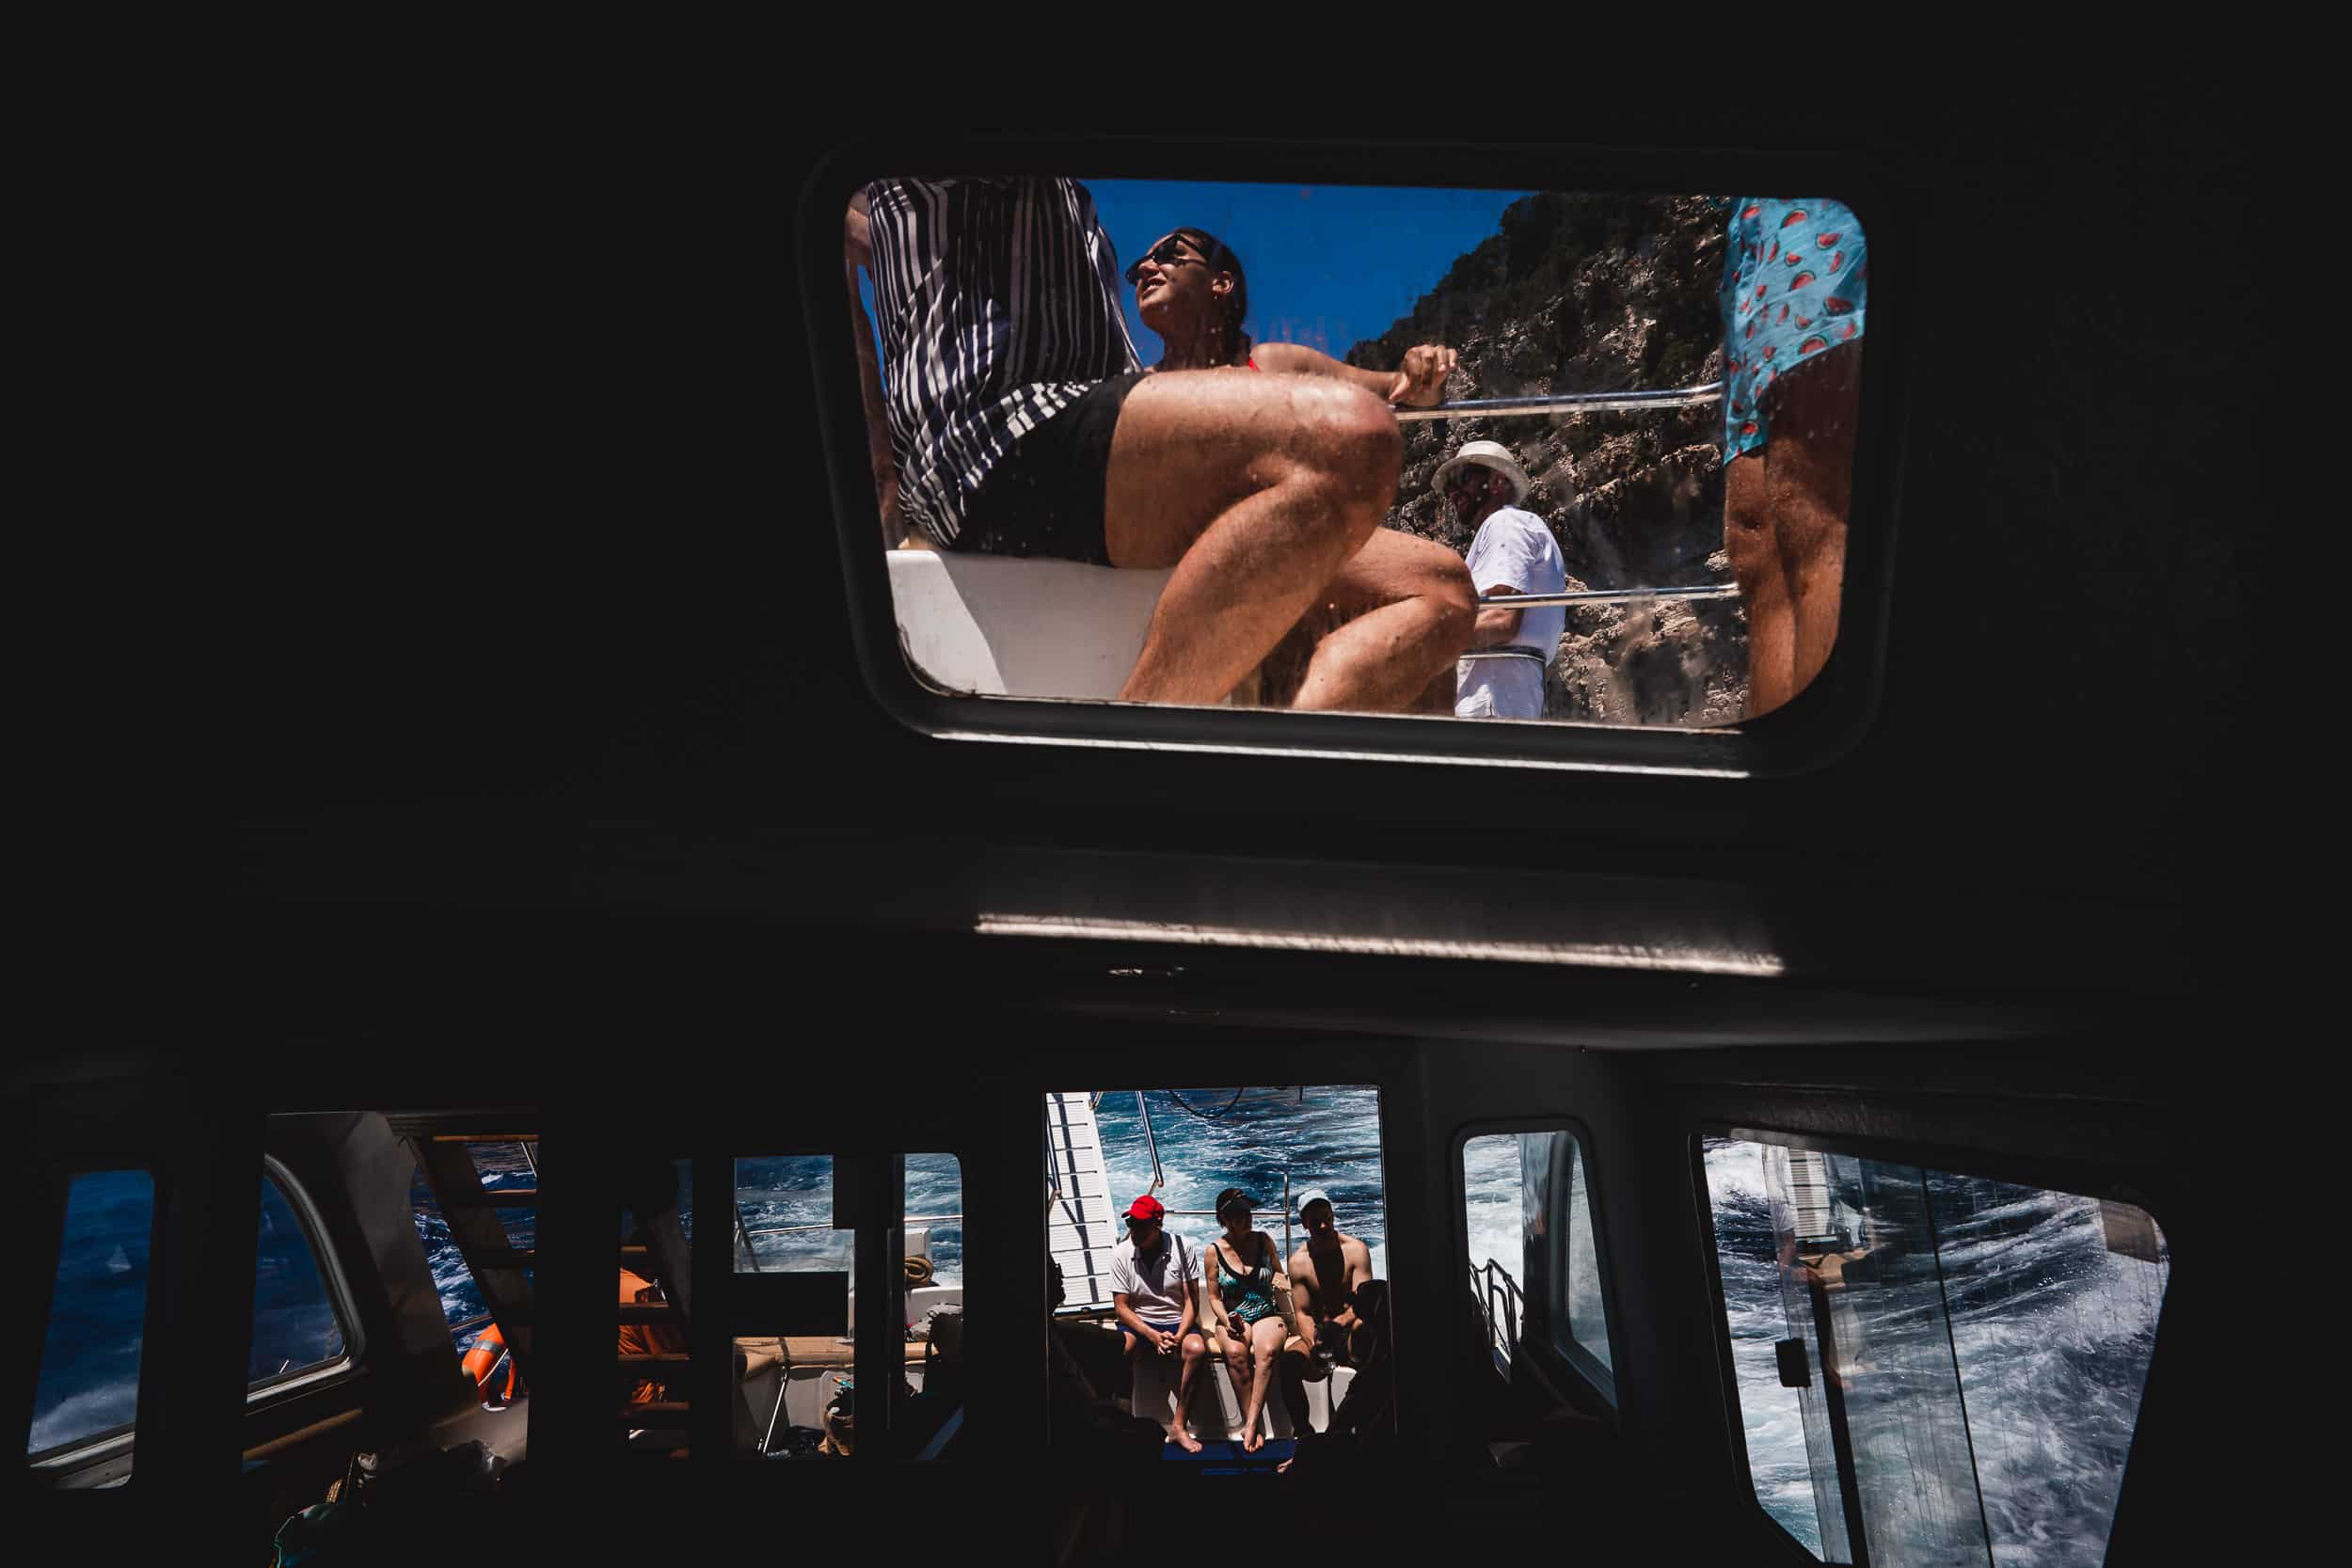 A group of people, including the bride, looking out of the window on a boat while posing for a wedding photo being taken by a wedding photographer.